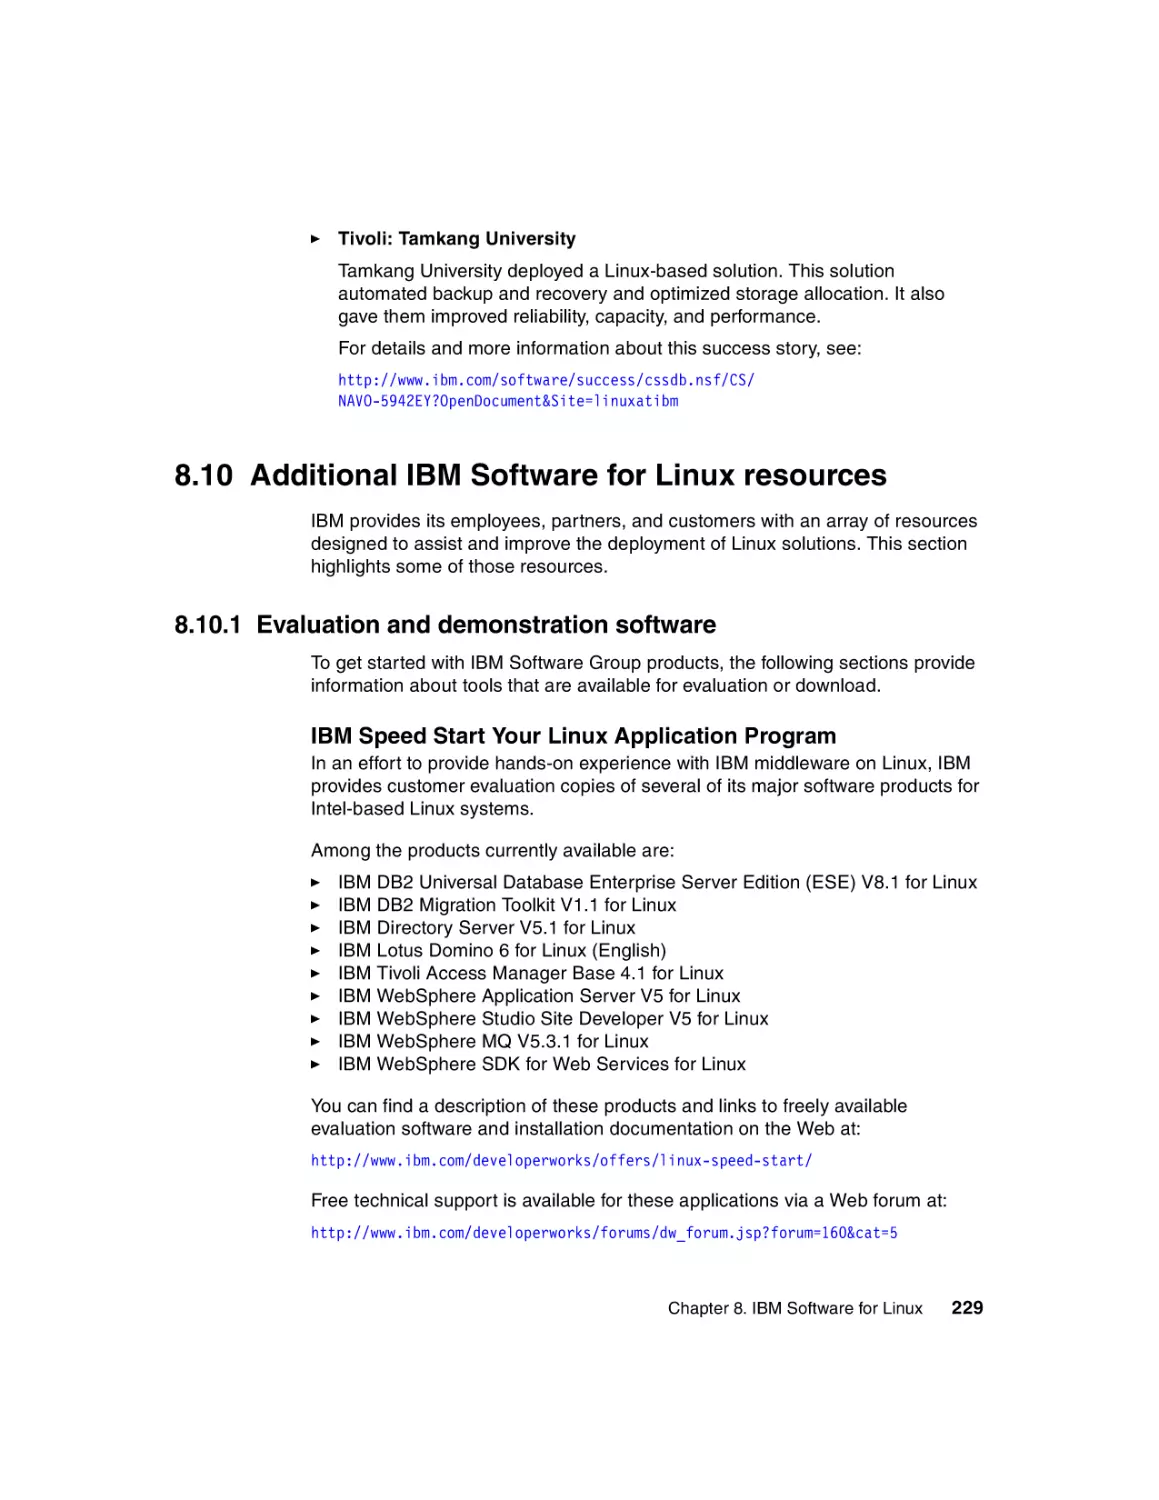 8.10 Additional IBM Software for Linux resources
8.10.1 Evaluation and demonstration software